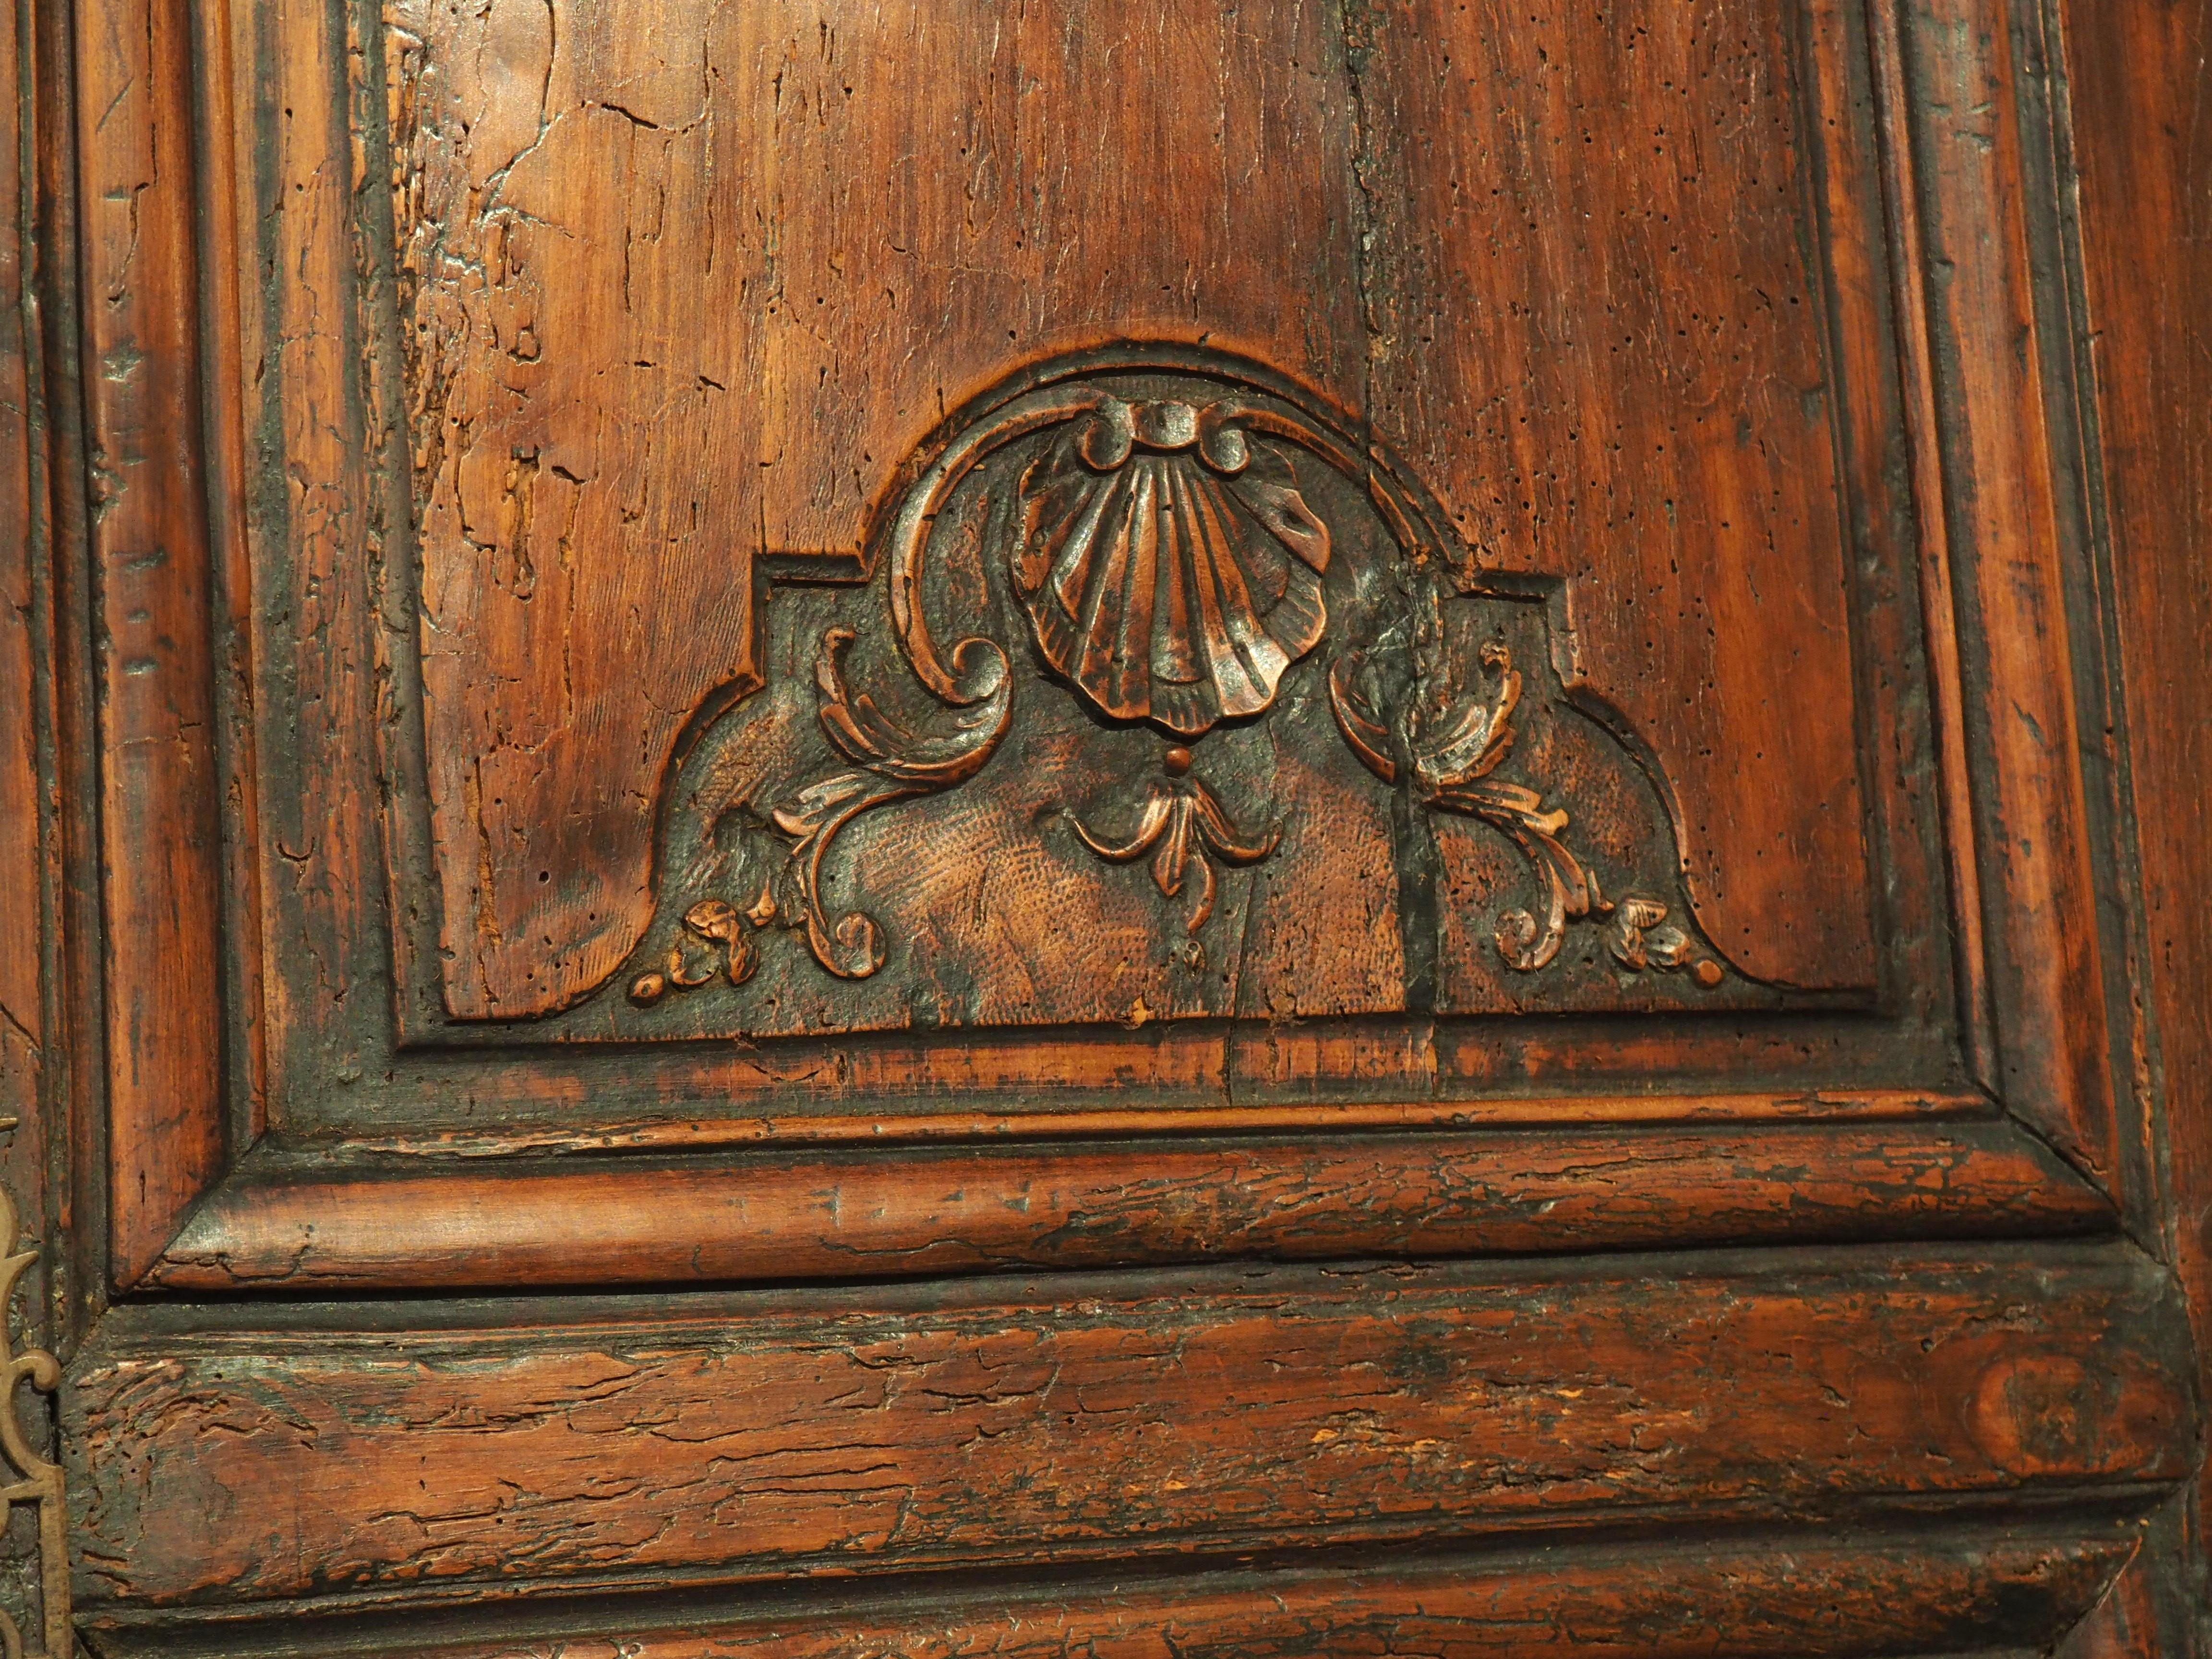 18th Century Pair of Antique Cherry Wood Armoire Doors from Rennes, France, Circa 1720